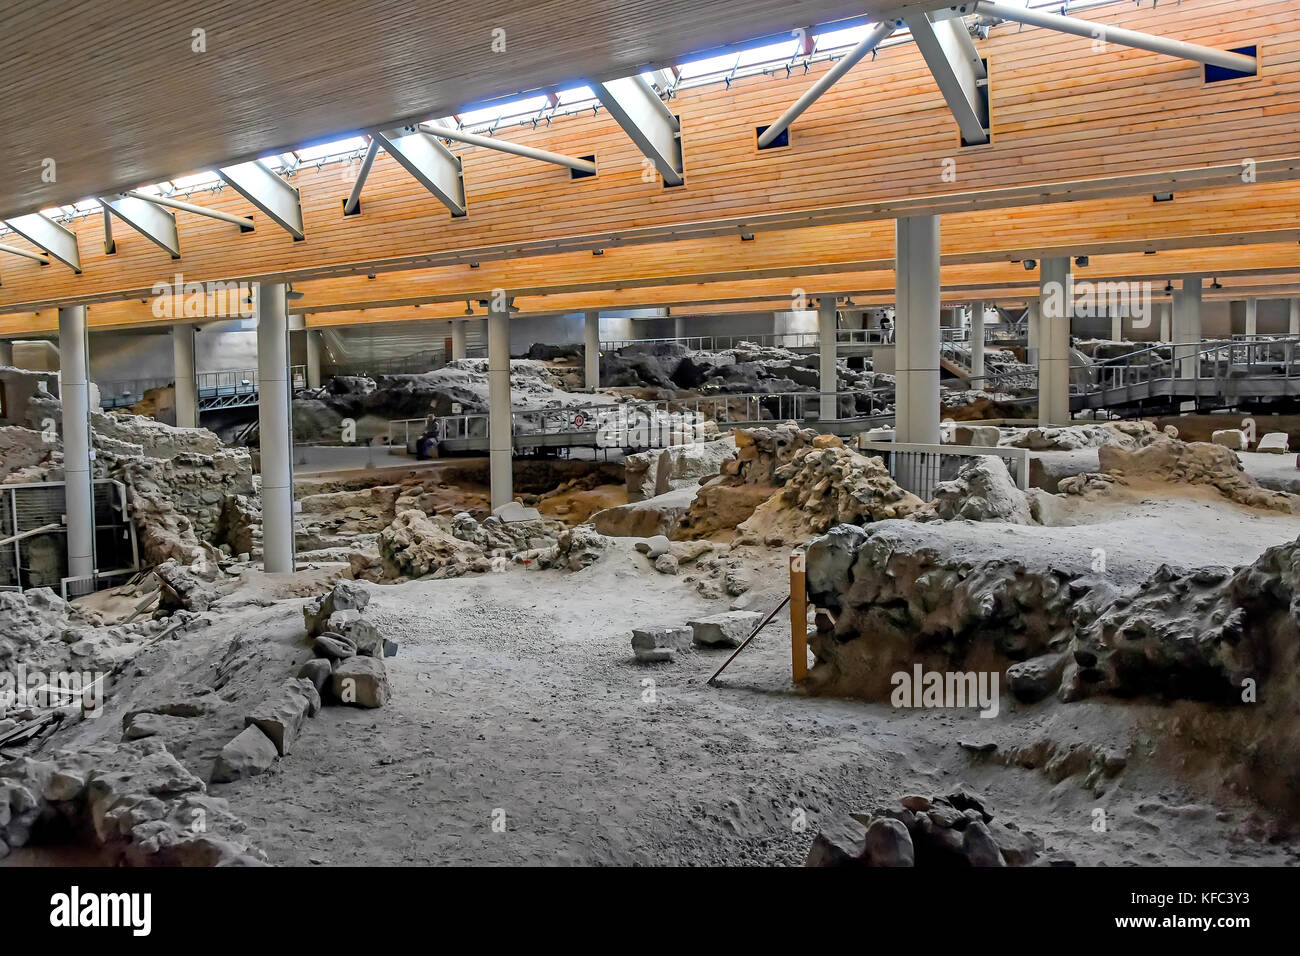 Akrotiri covered excavation of Minoan archaeolgical site showing building foundations at Santorini, Cyclades, Aegean Sea, Greece. Stock Photo